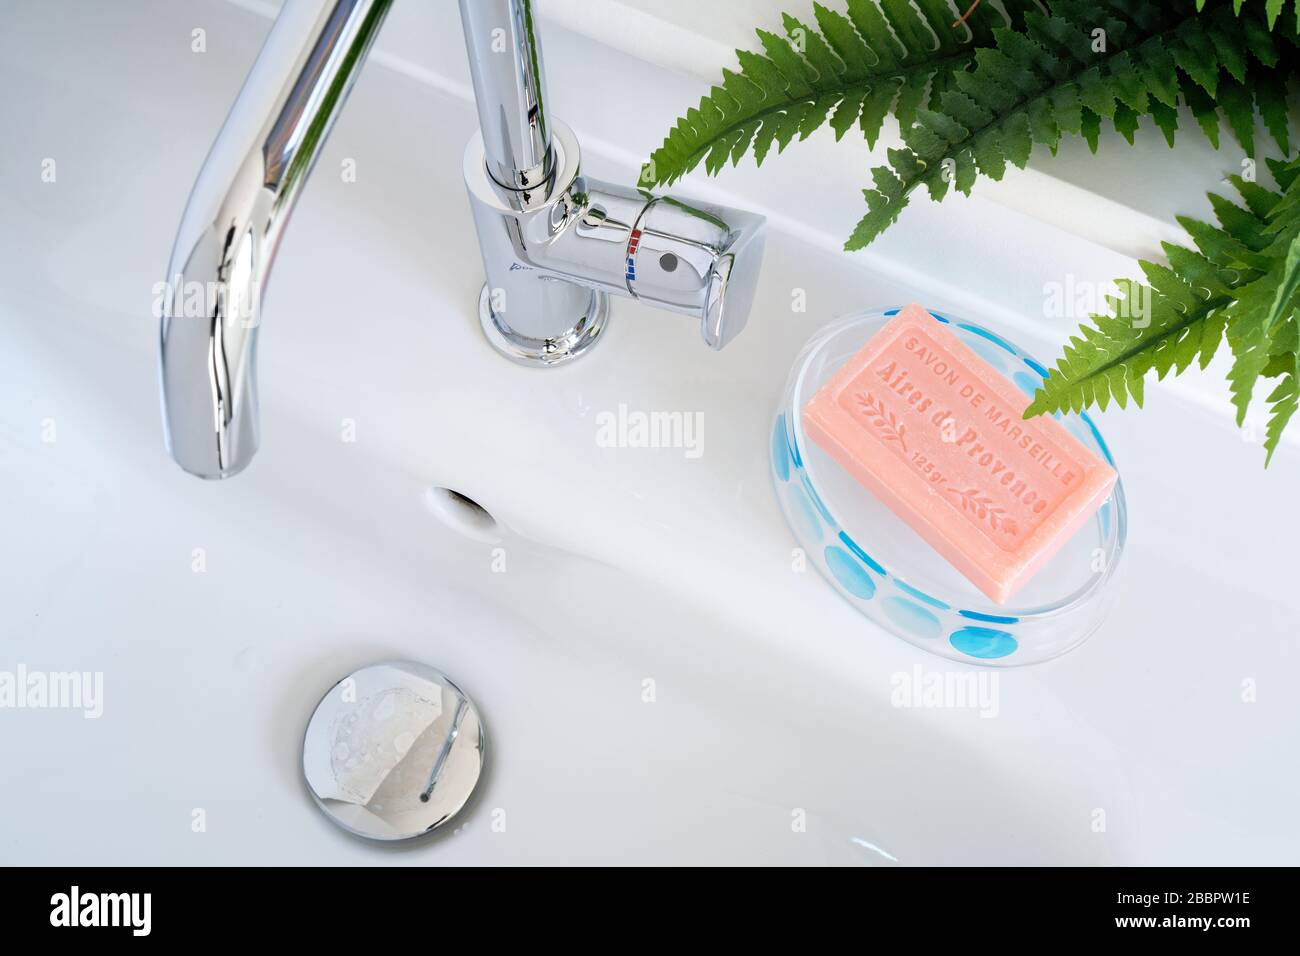 A domestic restroom washbasin or sink. Pink French soap bar, chrome tap and decorative fern. Stock Photo